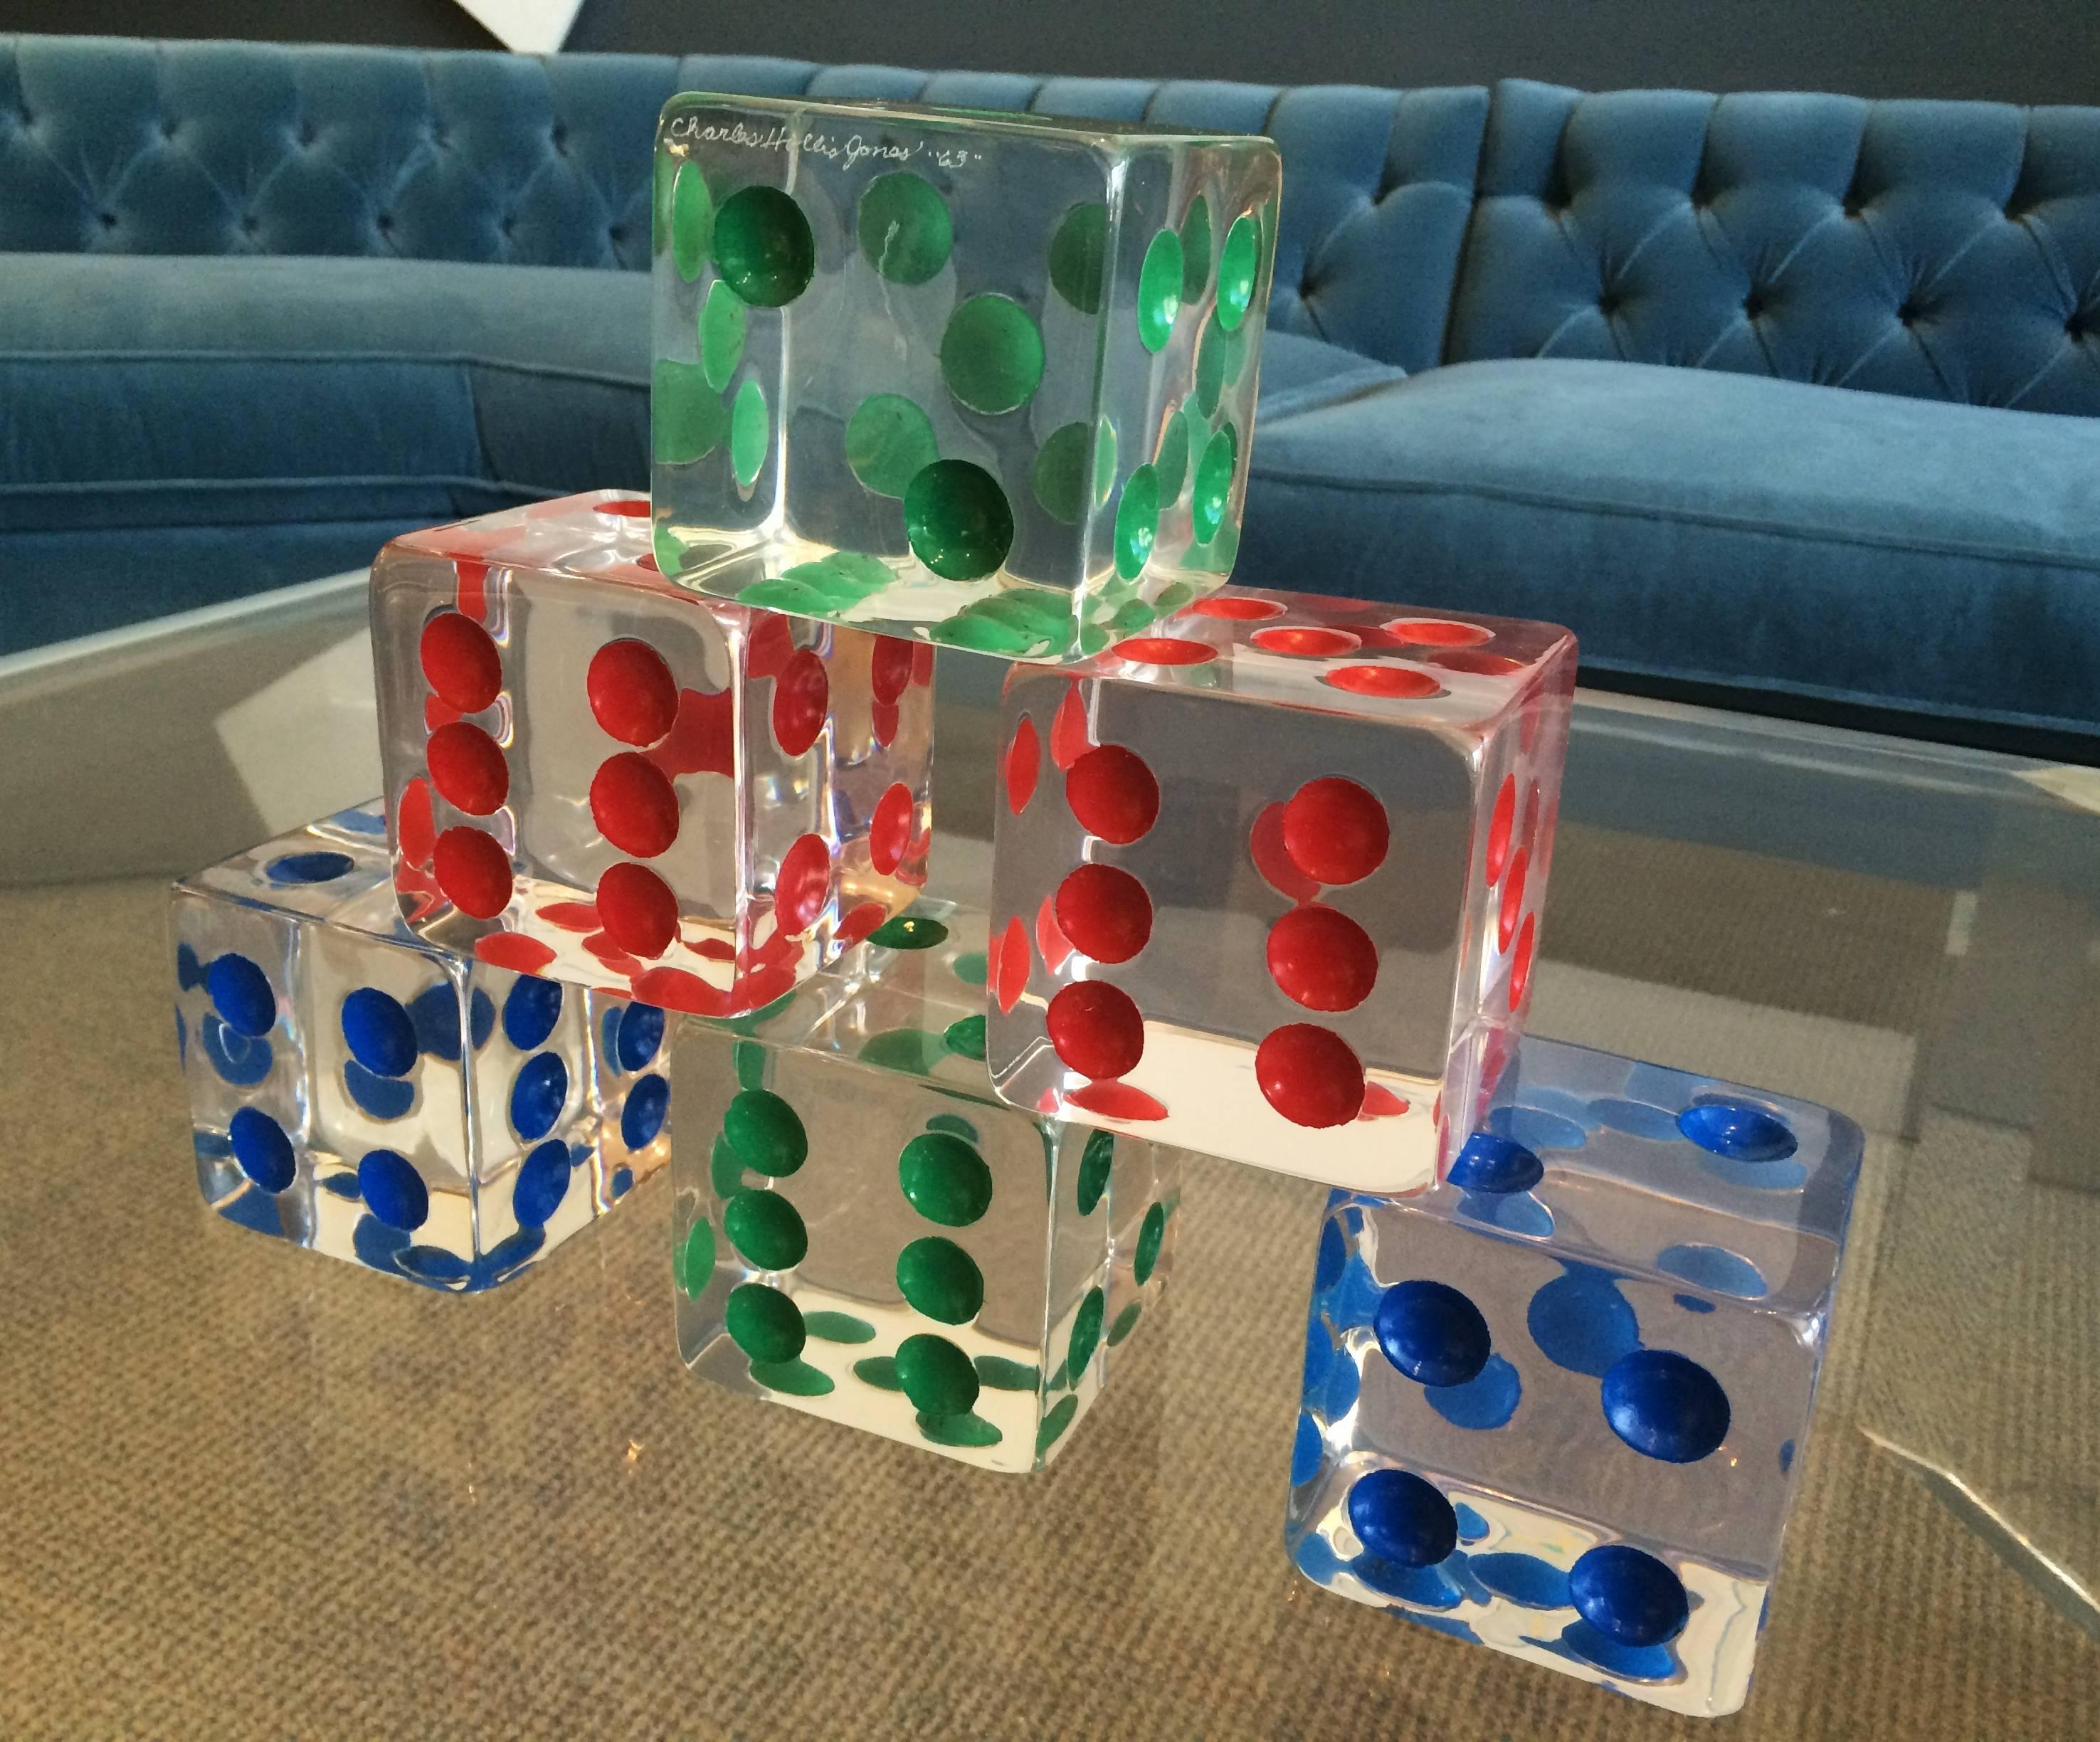 Stunning six-piece dice sculpture designed and manufactured in 1963 by Charles Hollis Jones.
The set is in excellent condition, free of chips and very minimal signs of wear.
The set is signed and dated 1963.

Measurements:
3.75